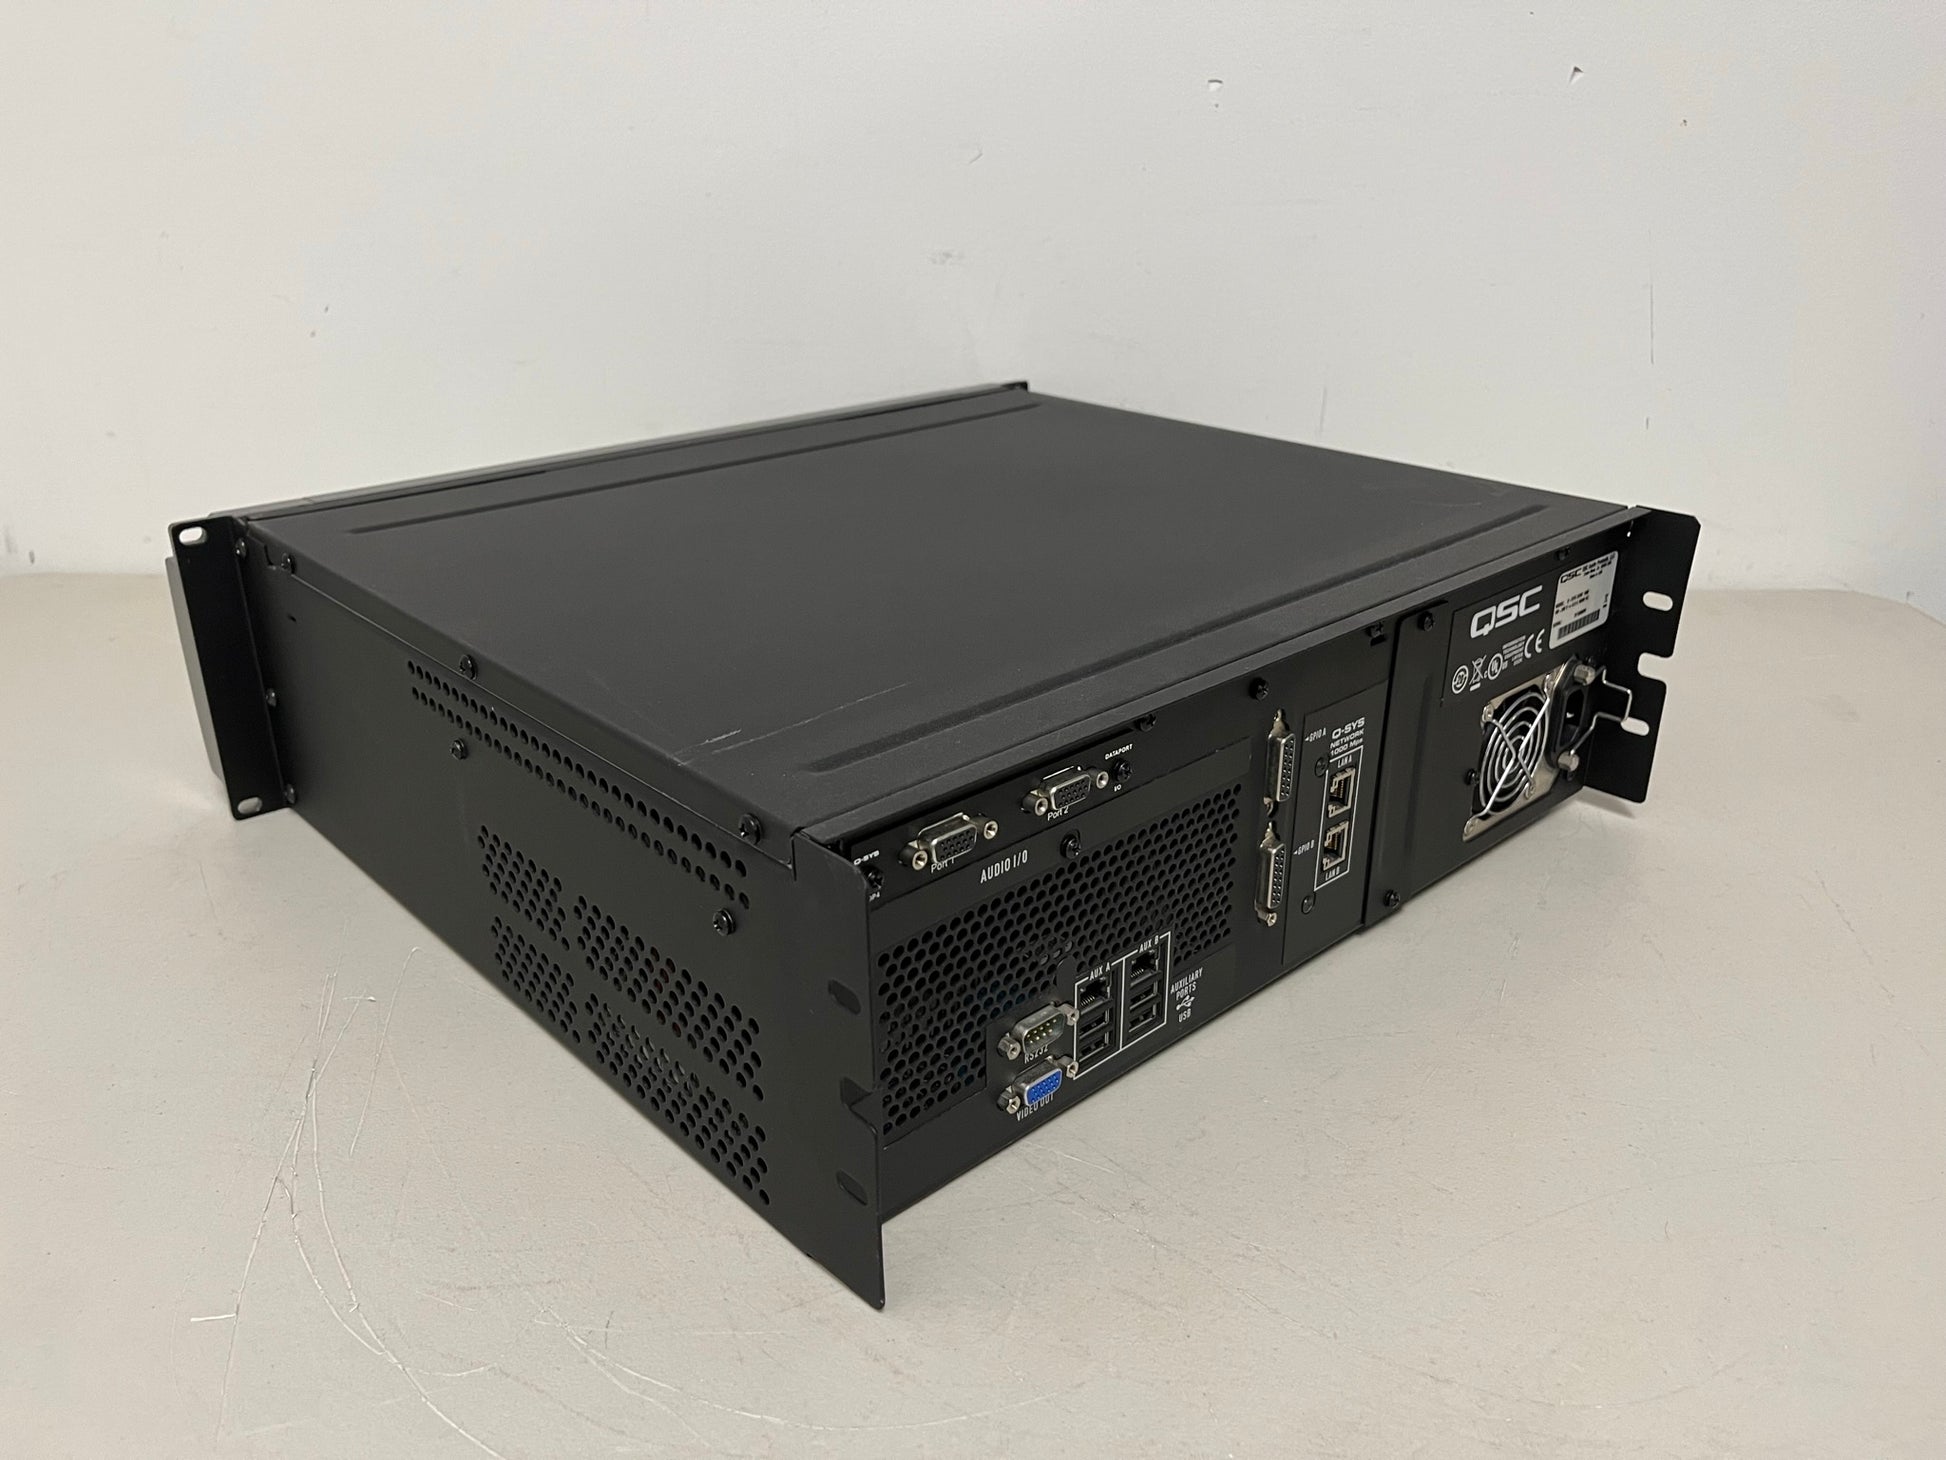 Used QSC Q-SYS Core 1000 for Sale. We Sell Professional Audio Equipment. Audio Systems, Amplifiers, Consoles, Mixers, Electronics, Entertainment, Sound, Live.